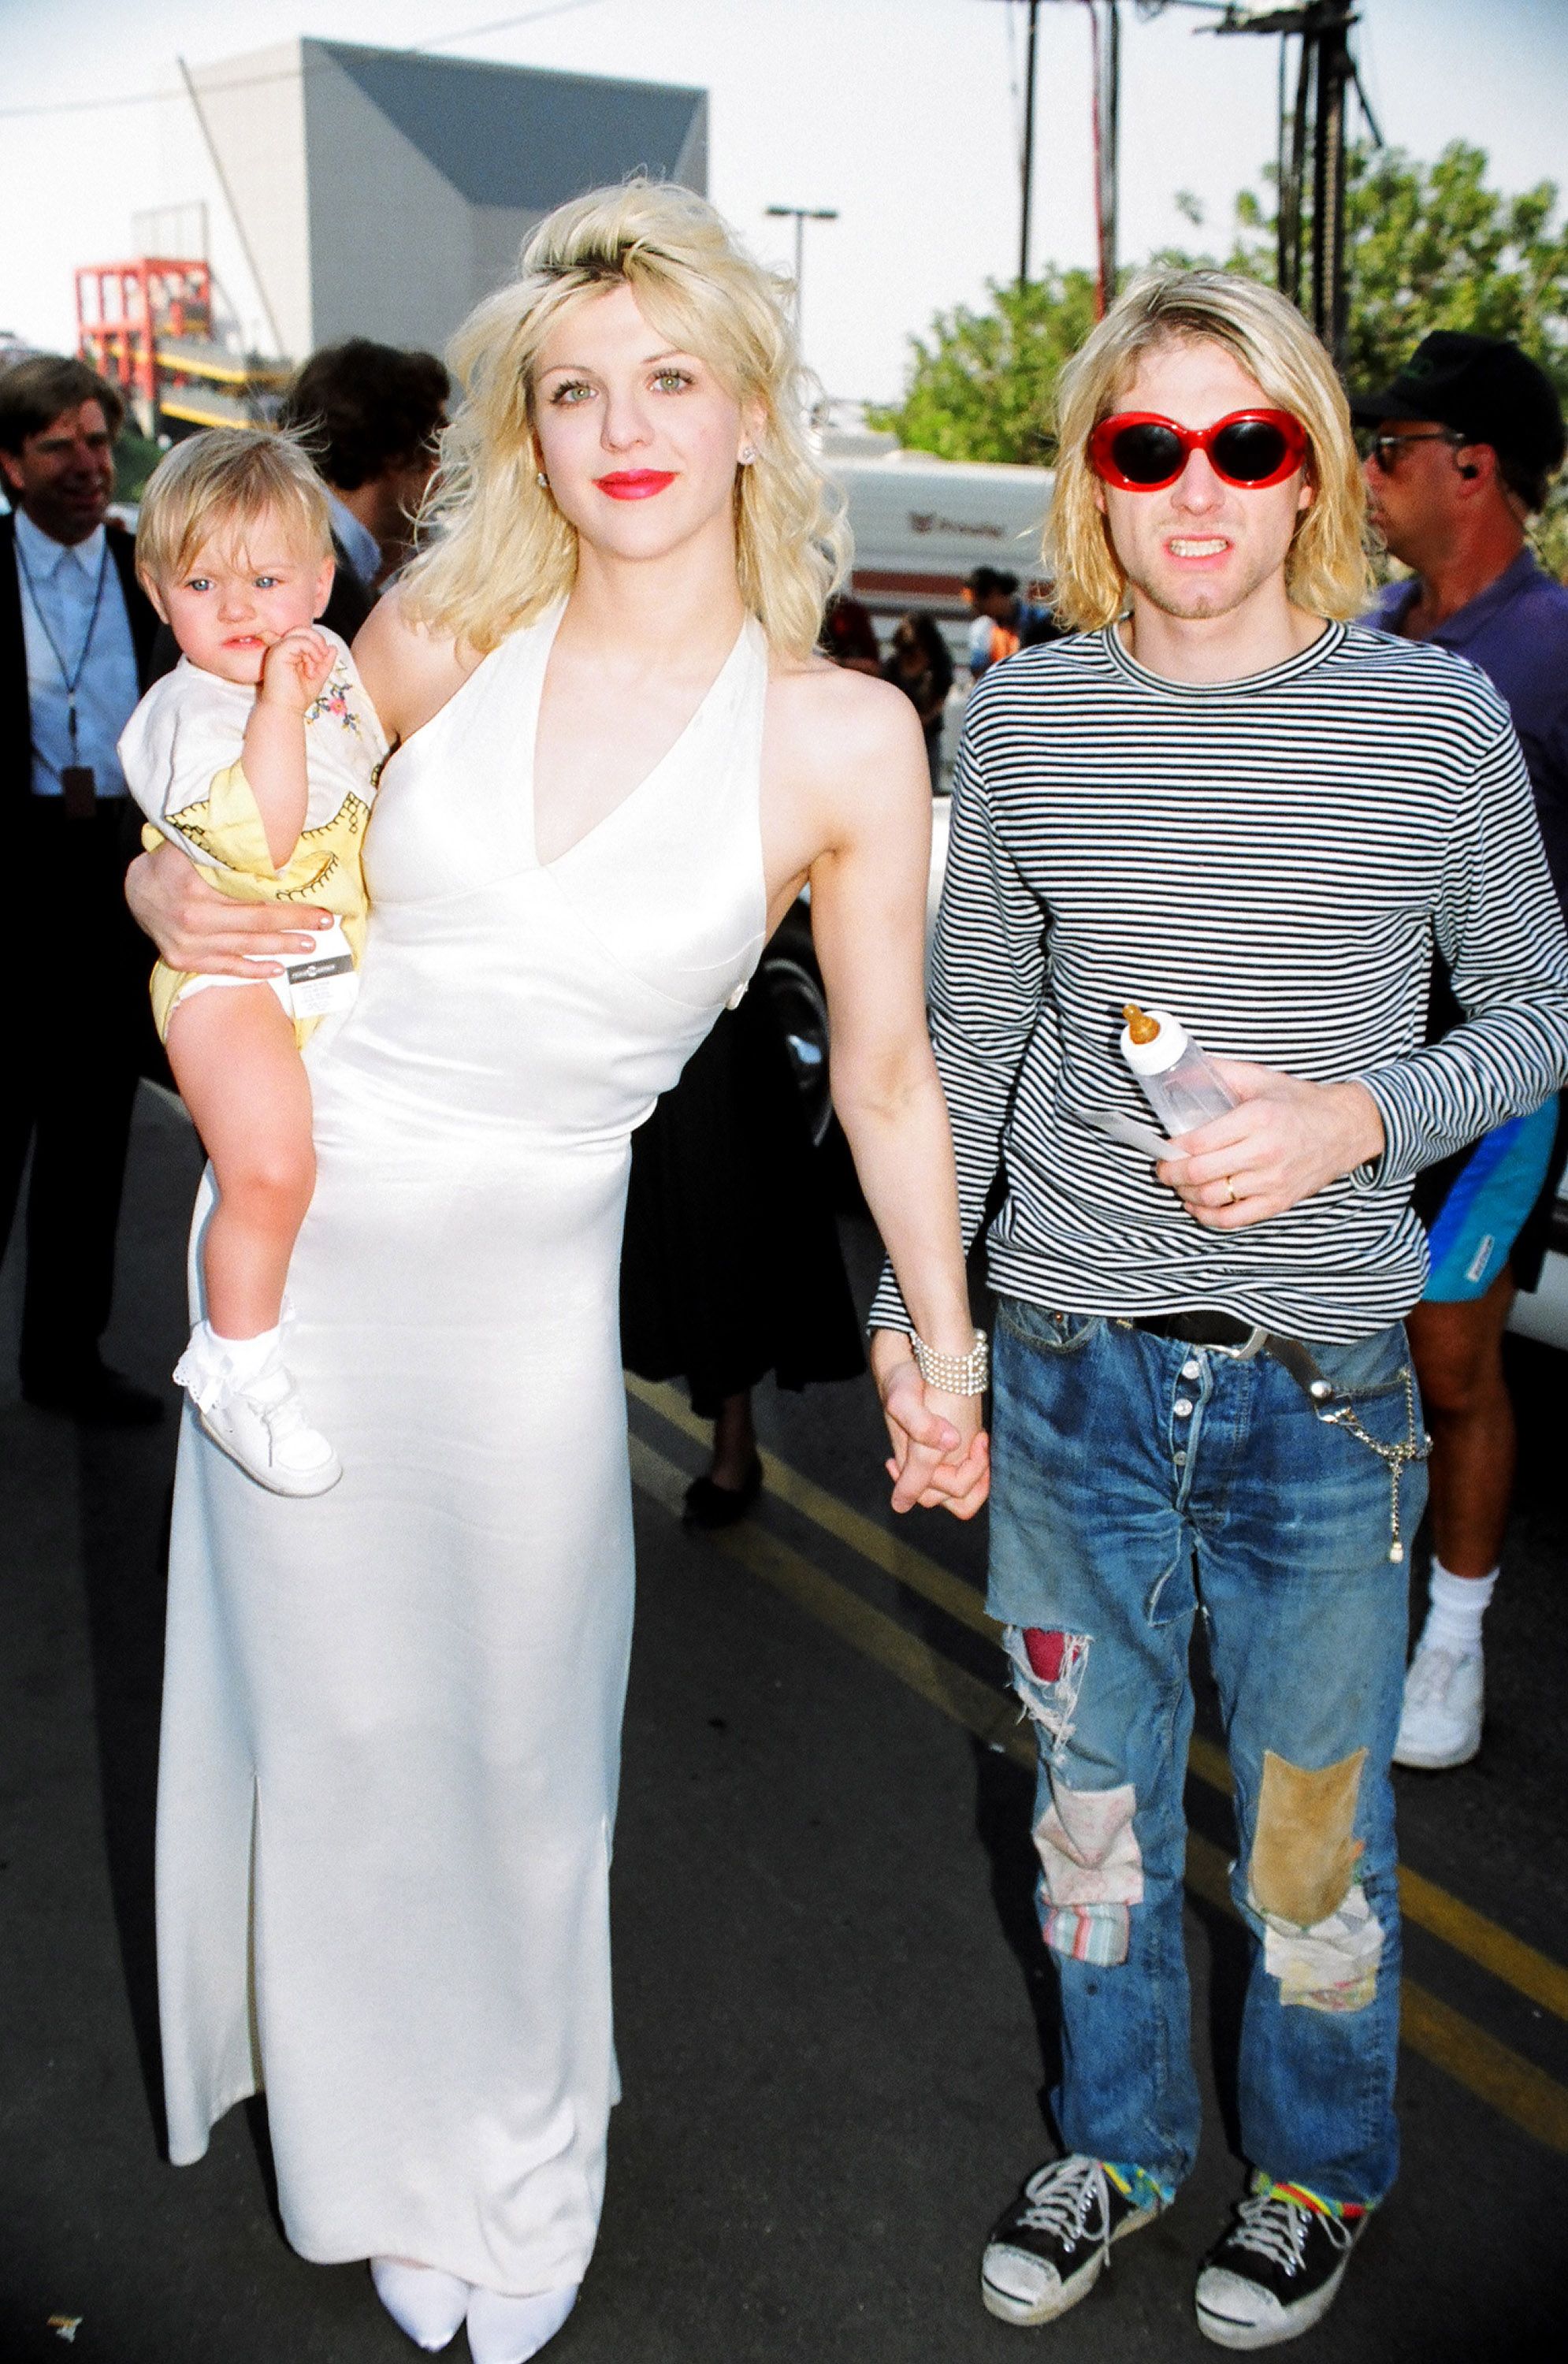 Courtney Love, Frances Bean Cobain, Kurt Cobain at the 1993 MTV Video Music Awards | Source: Getty Images